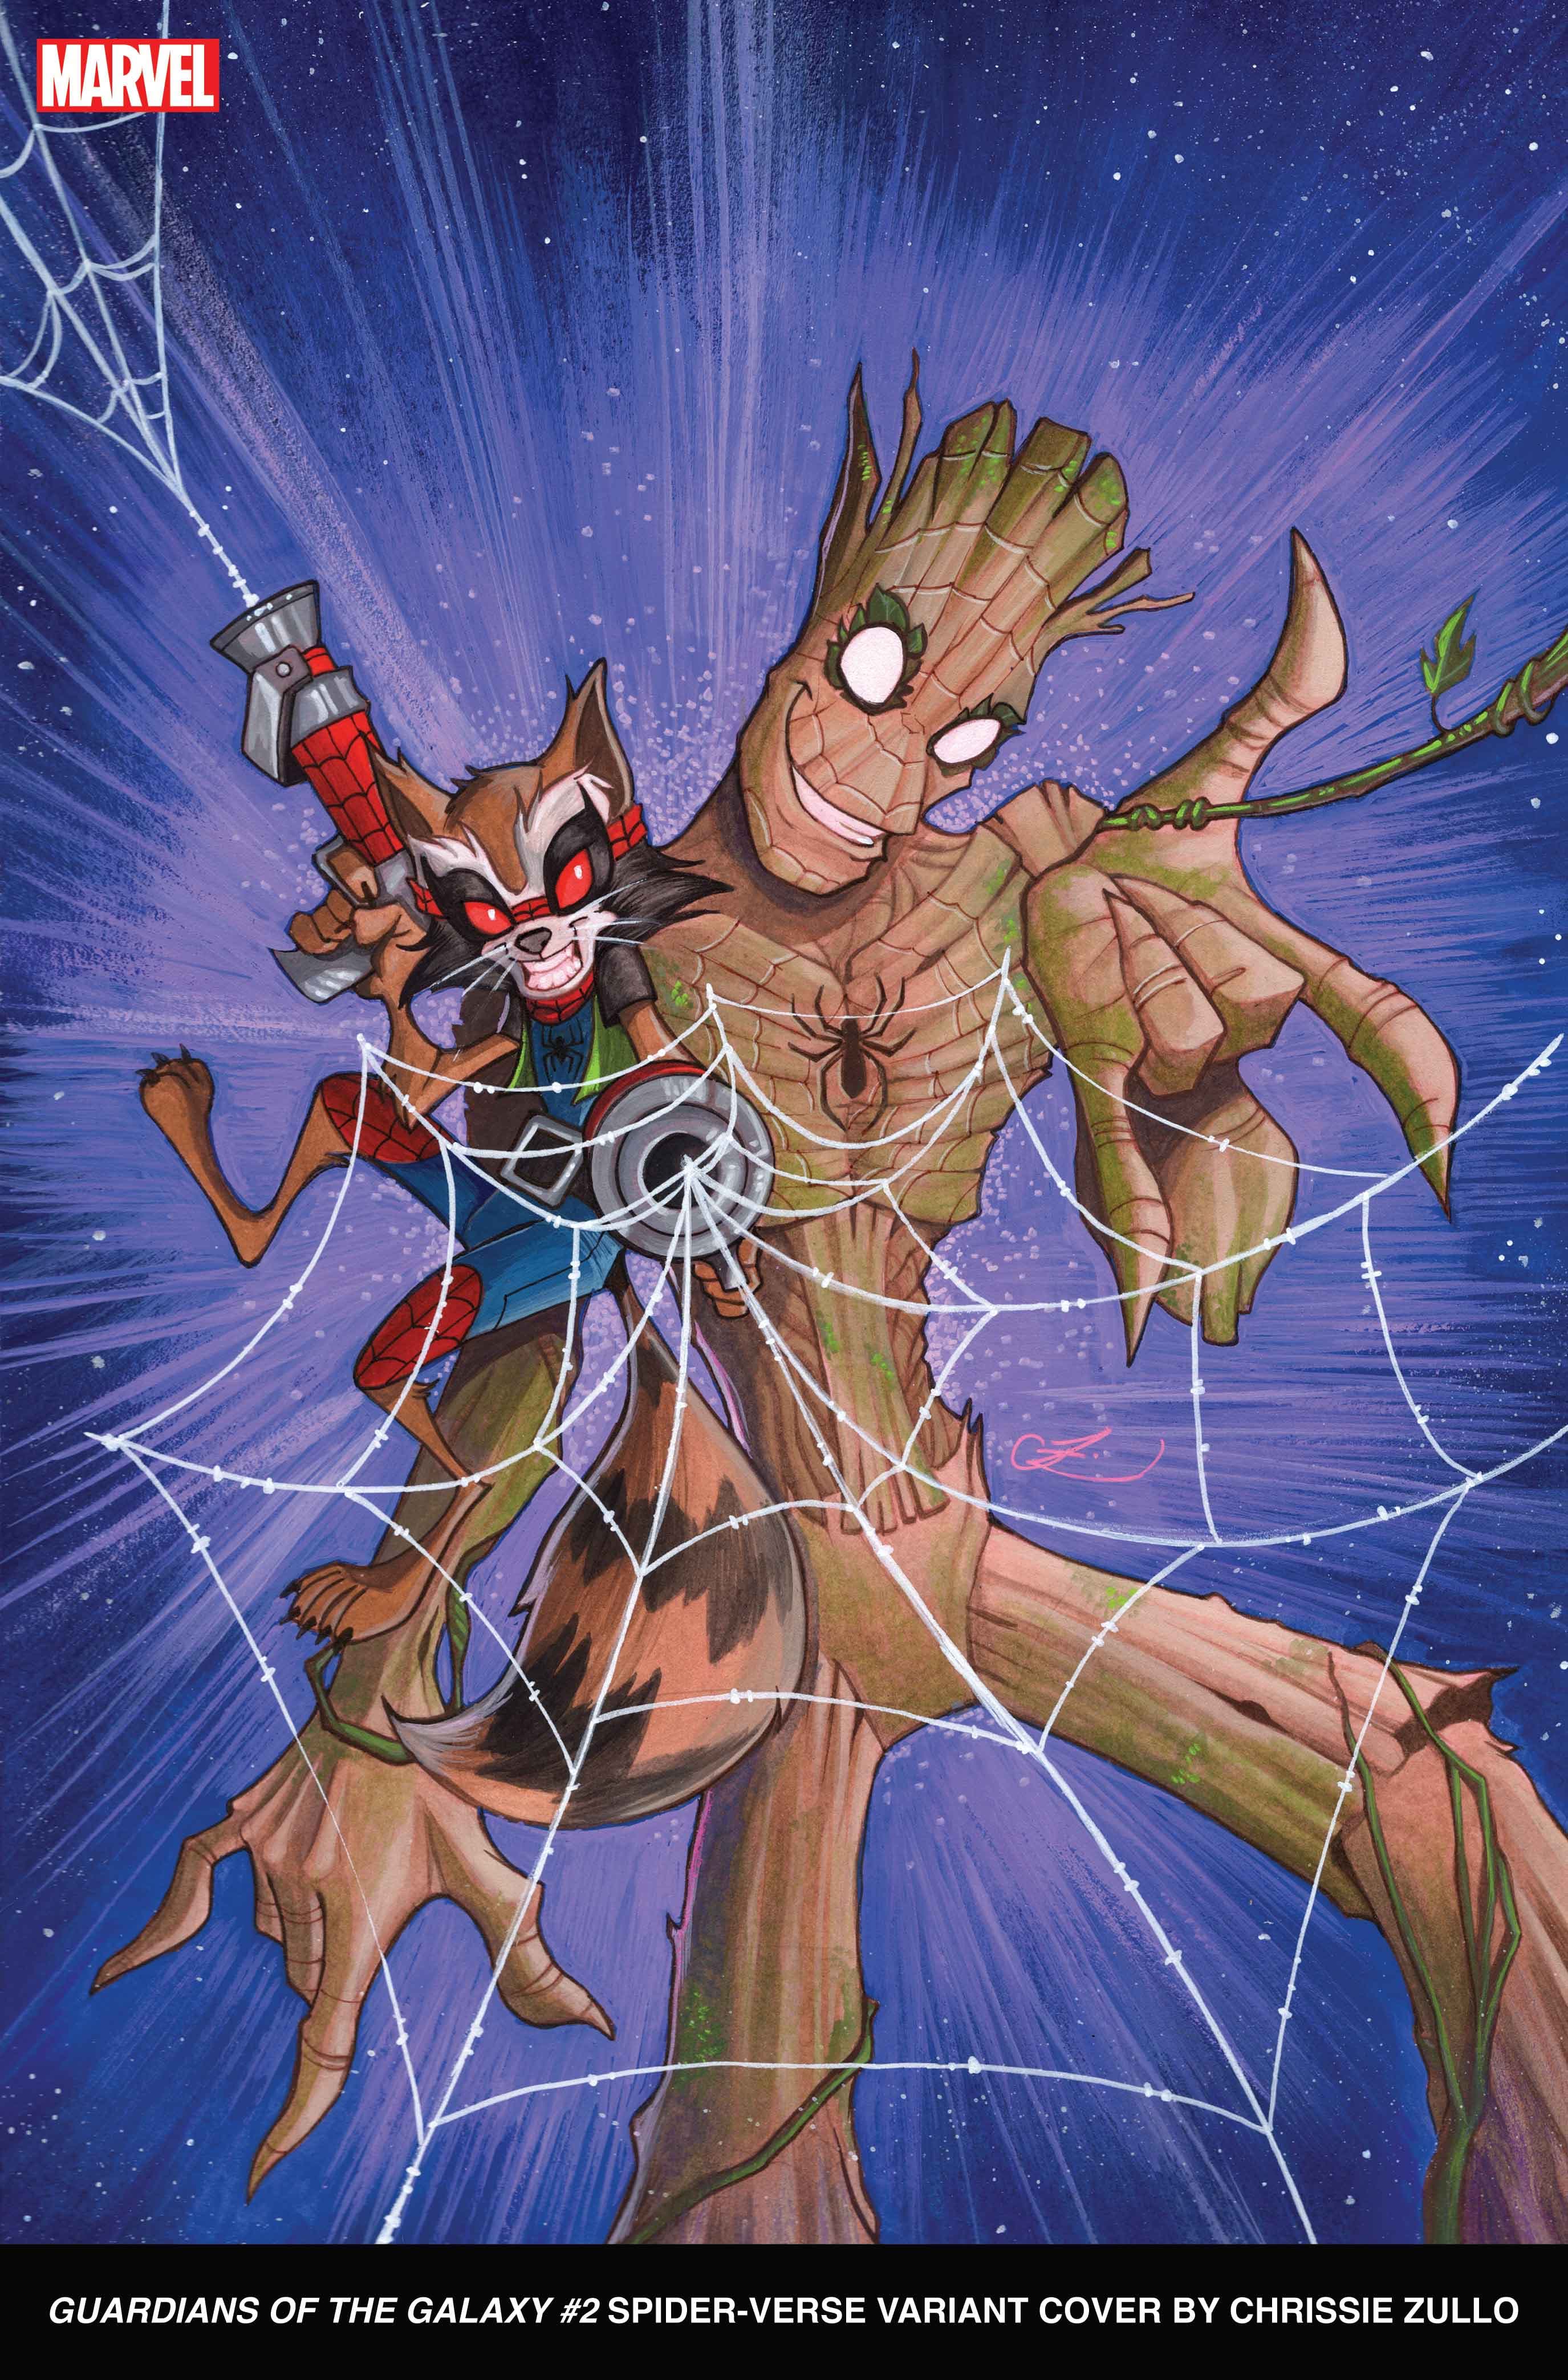 GUARDIANS OF THE GALAXY #2 Spider-Verse Variant Cover by Chrissie Zullo